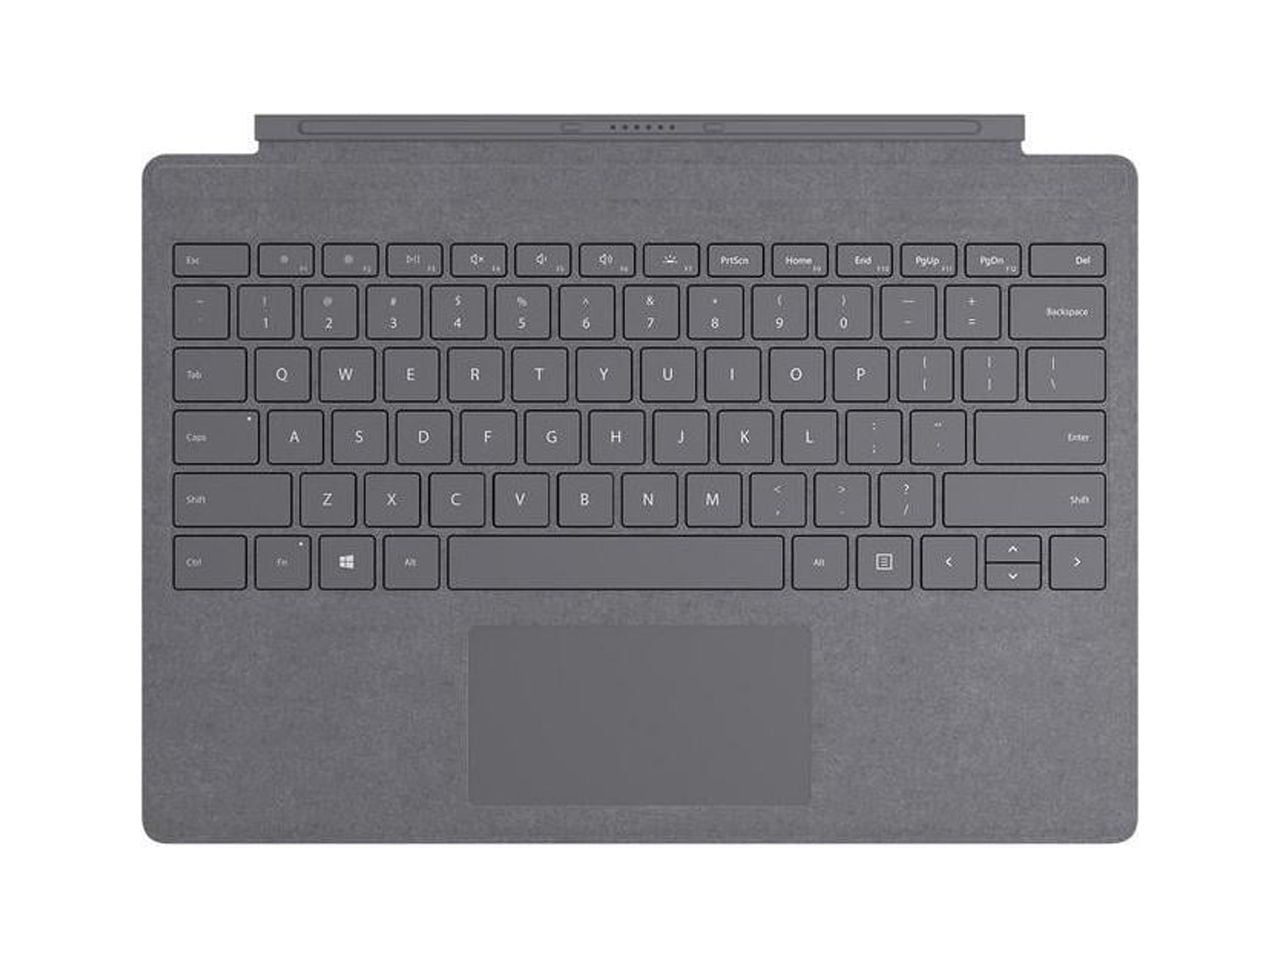 SURFACE PRO SIGNA TYPE COVER ENGLISH LT CHARCOAL - Walmart.com